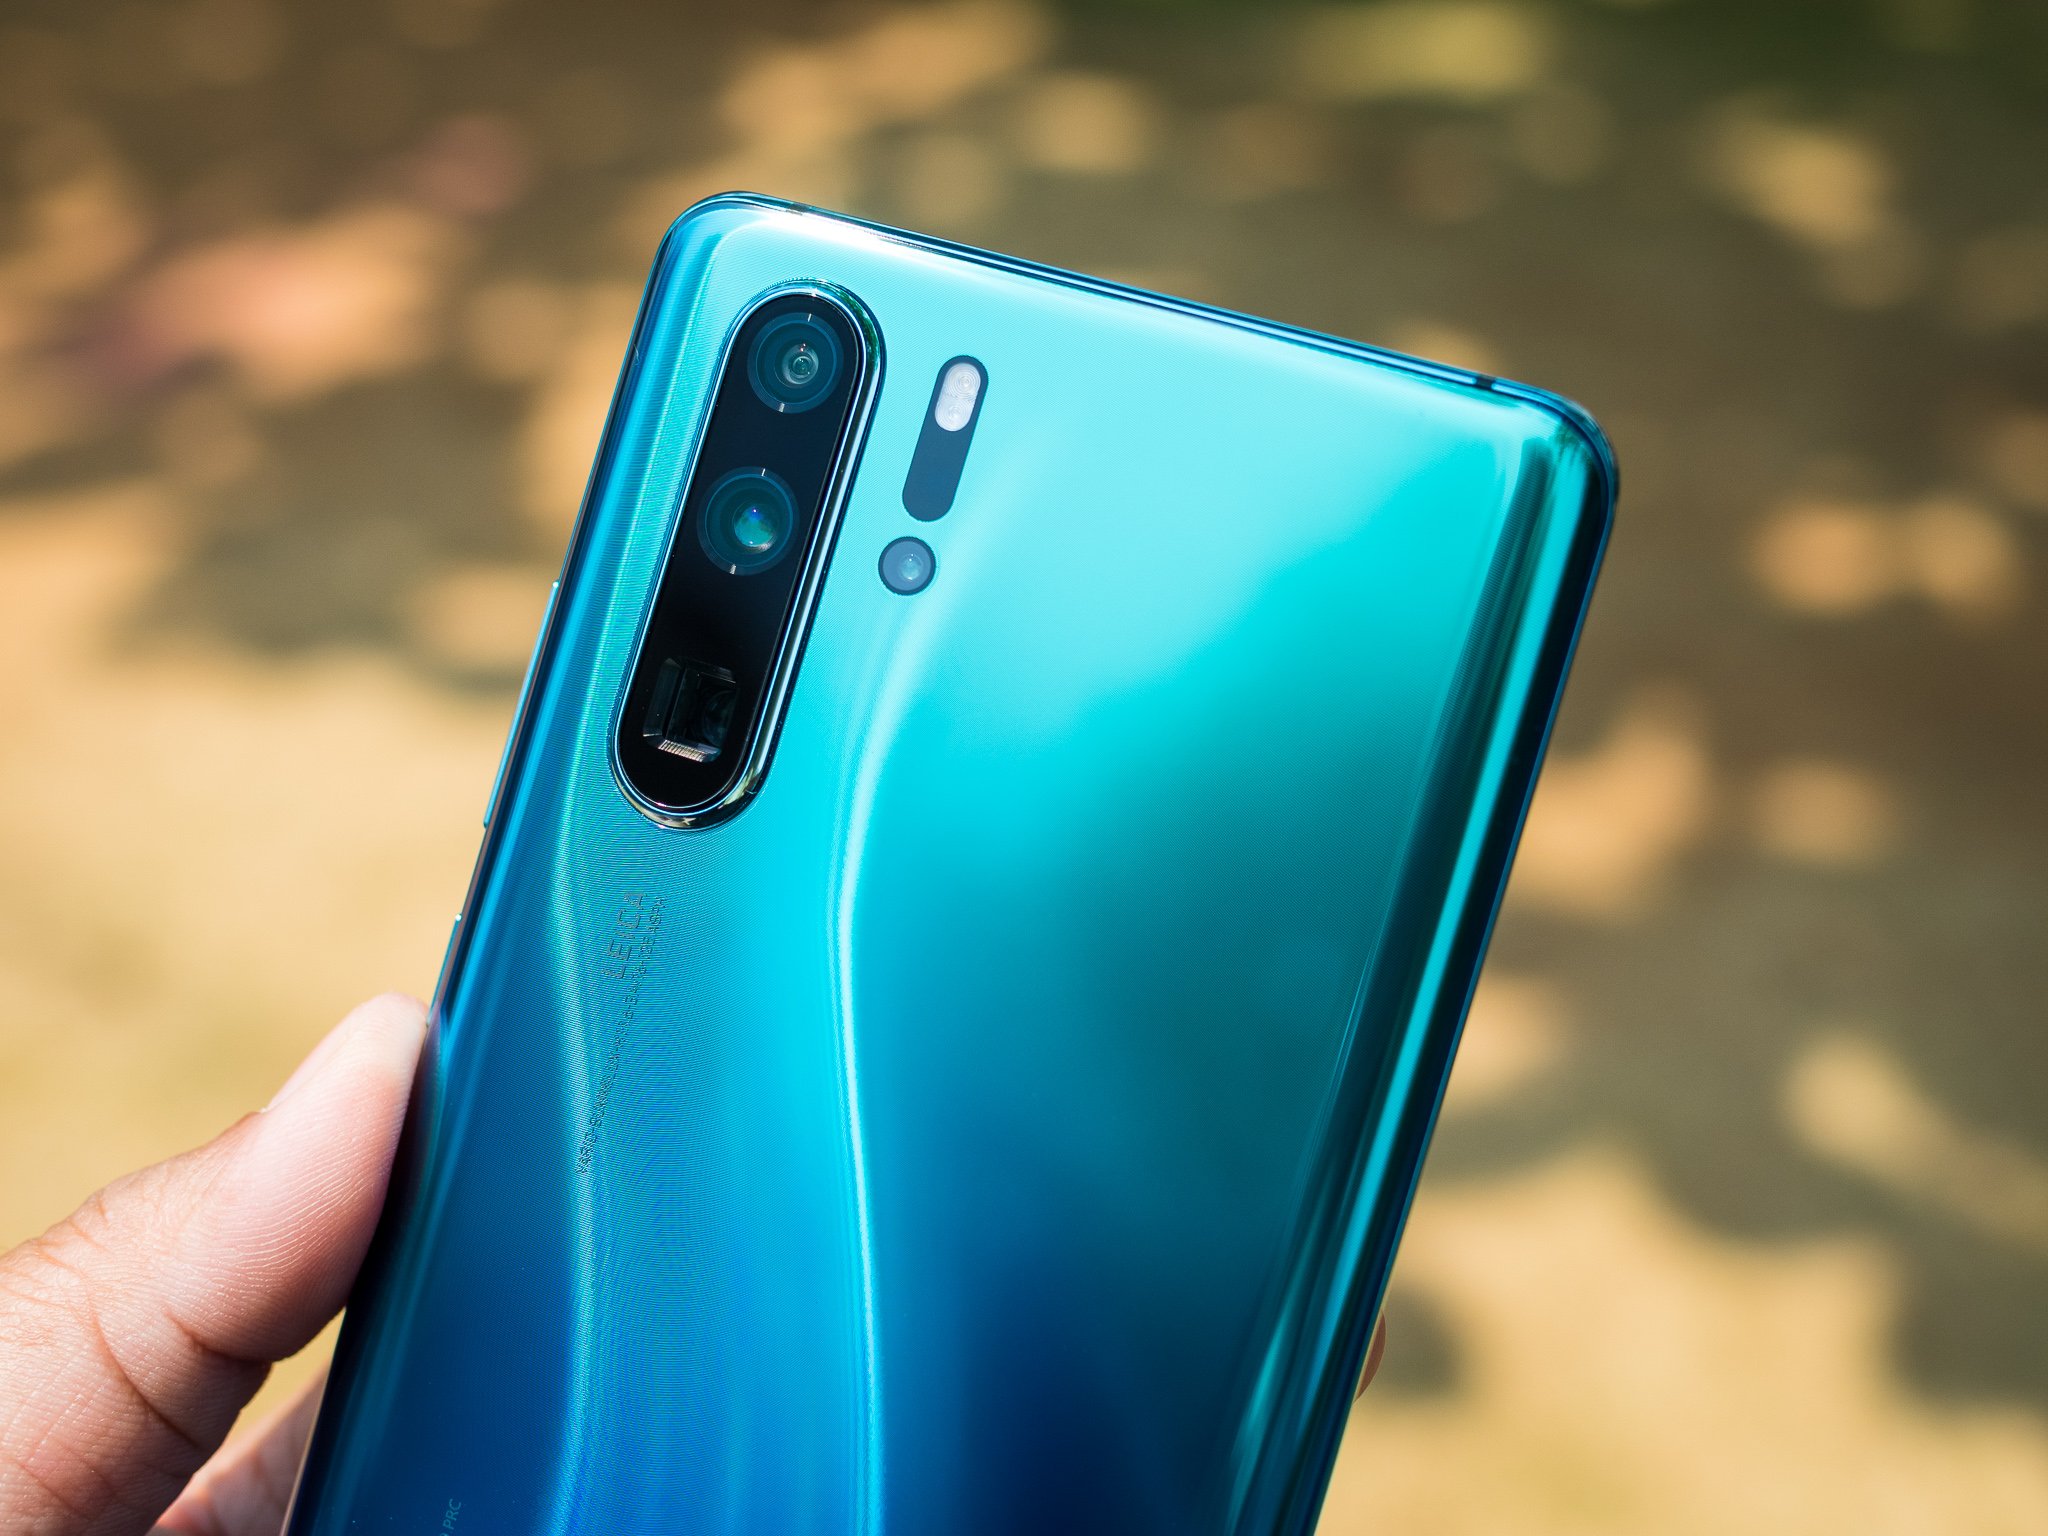 Huawei faces another huge blow as ARM cuts ties with the Chinese brand